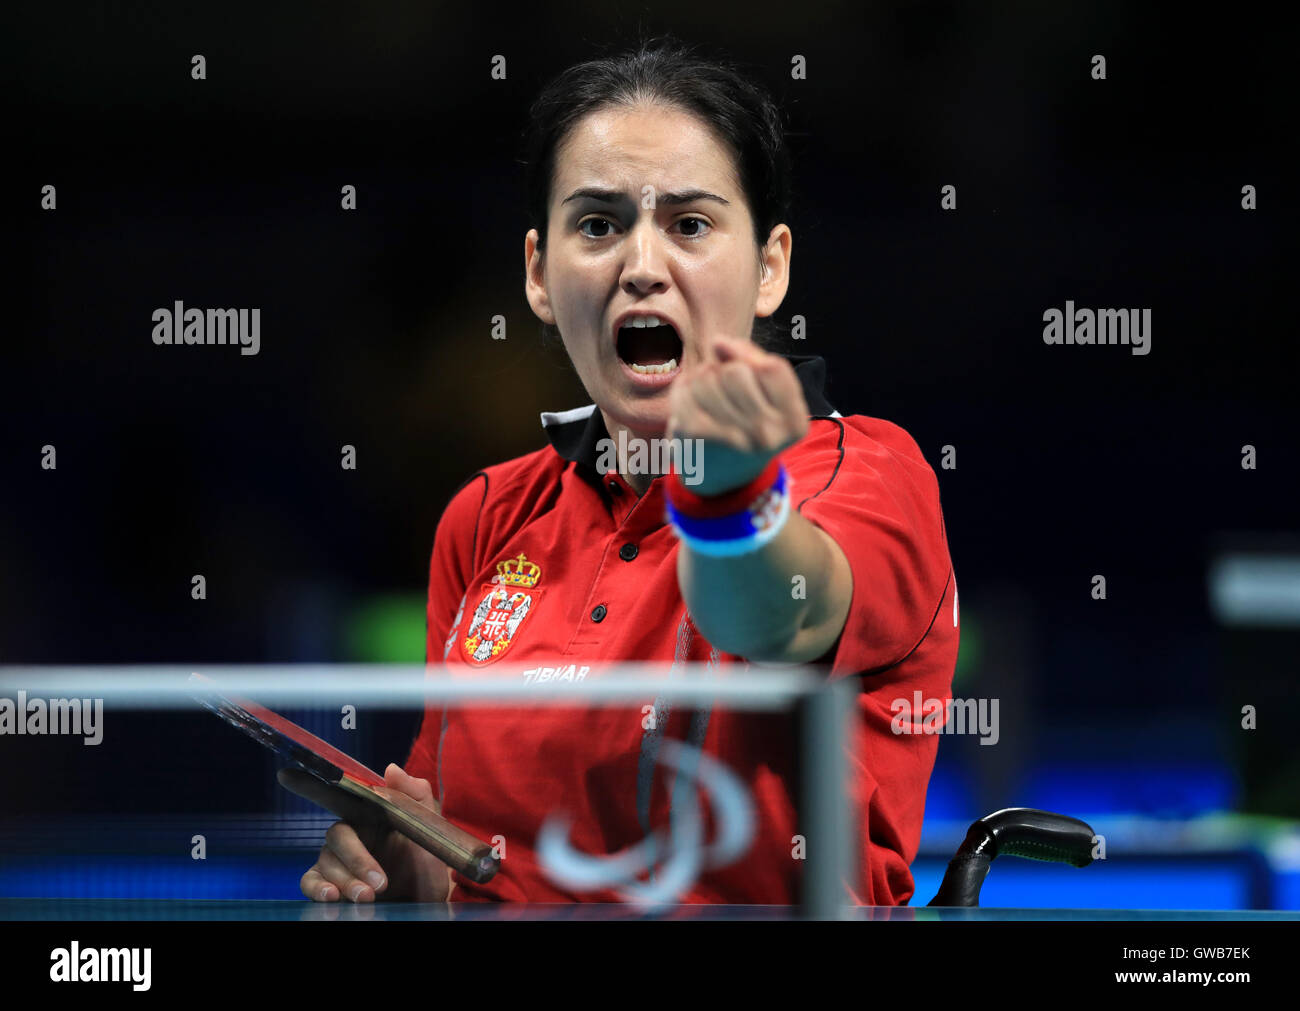 Serbia's Nada Matic competes in the the class four Women's Singles Table Tennis bronze Medal Match, during the fifth day of the 2016 Rio Paralympic Games in Rio de Janeiro, Brazil. Stock Photo